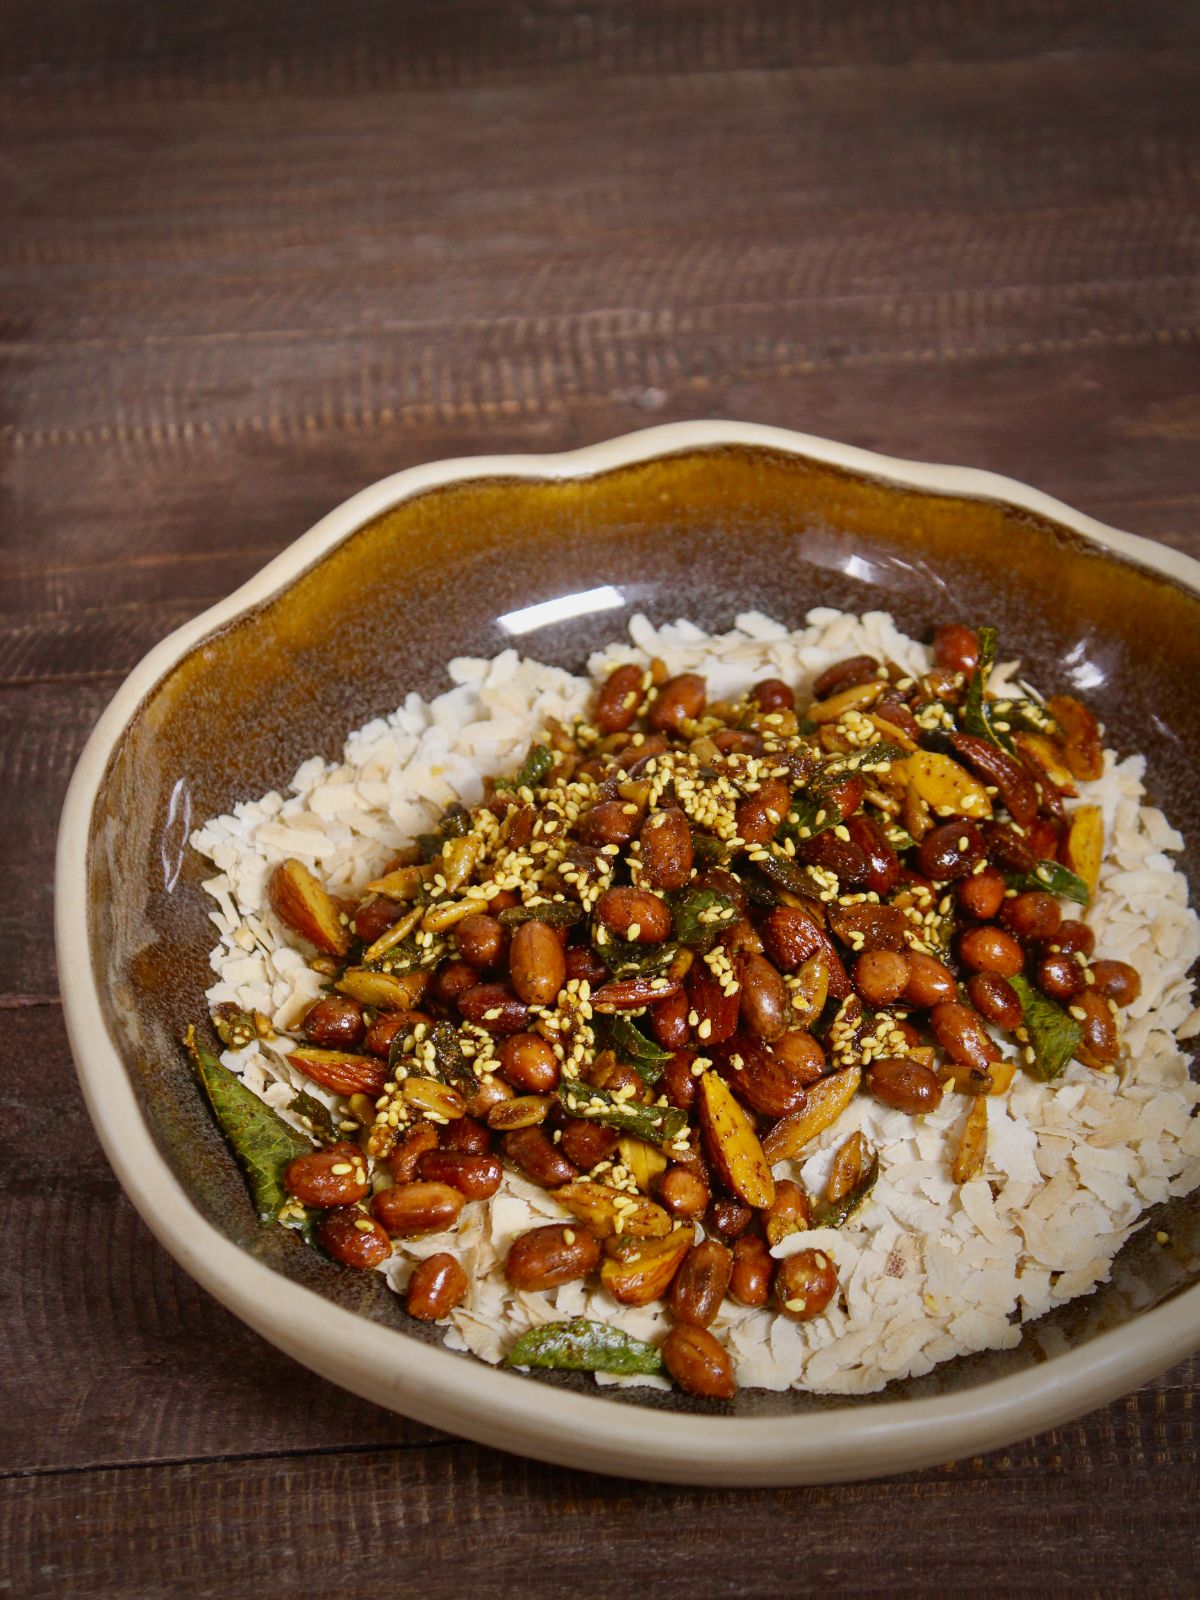 mix peanuts mixture over the flattened rice and enjoy your oven roasted poha chivda